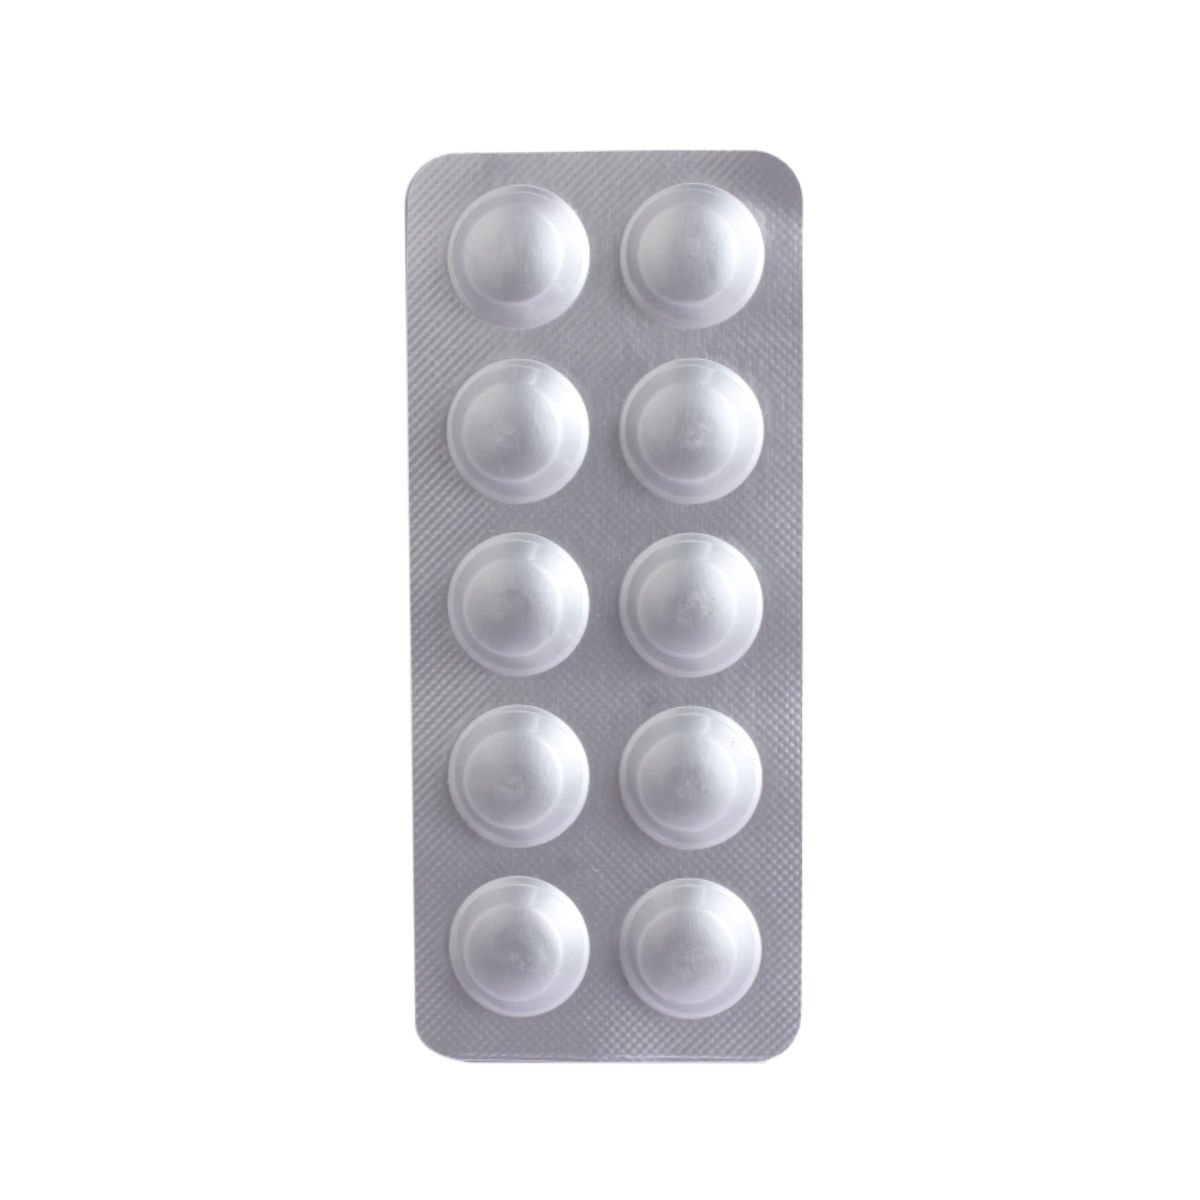 Thiabion 100mg Tablet 10's, Pack of 10 TabletS